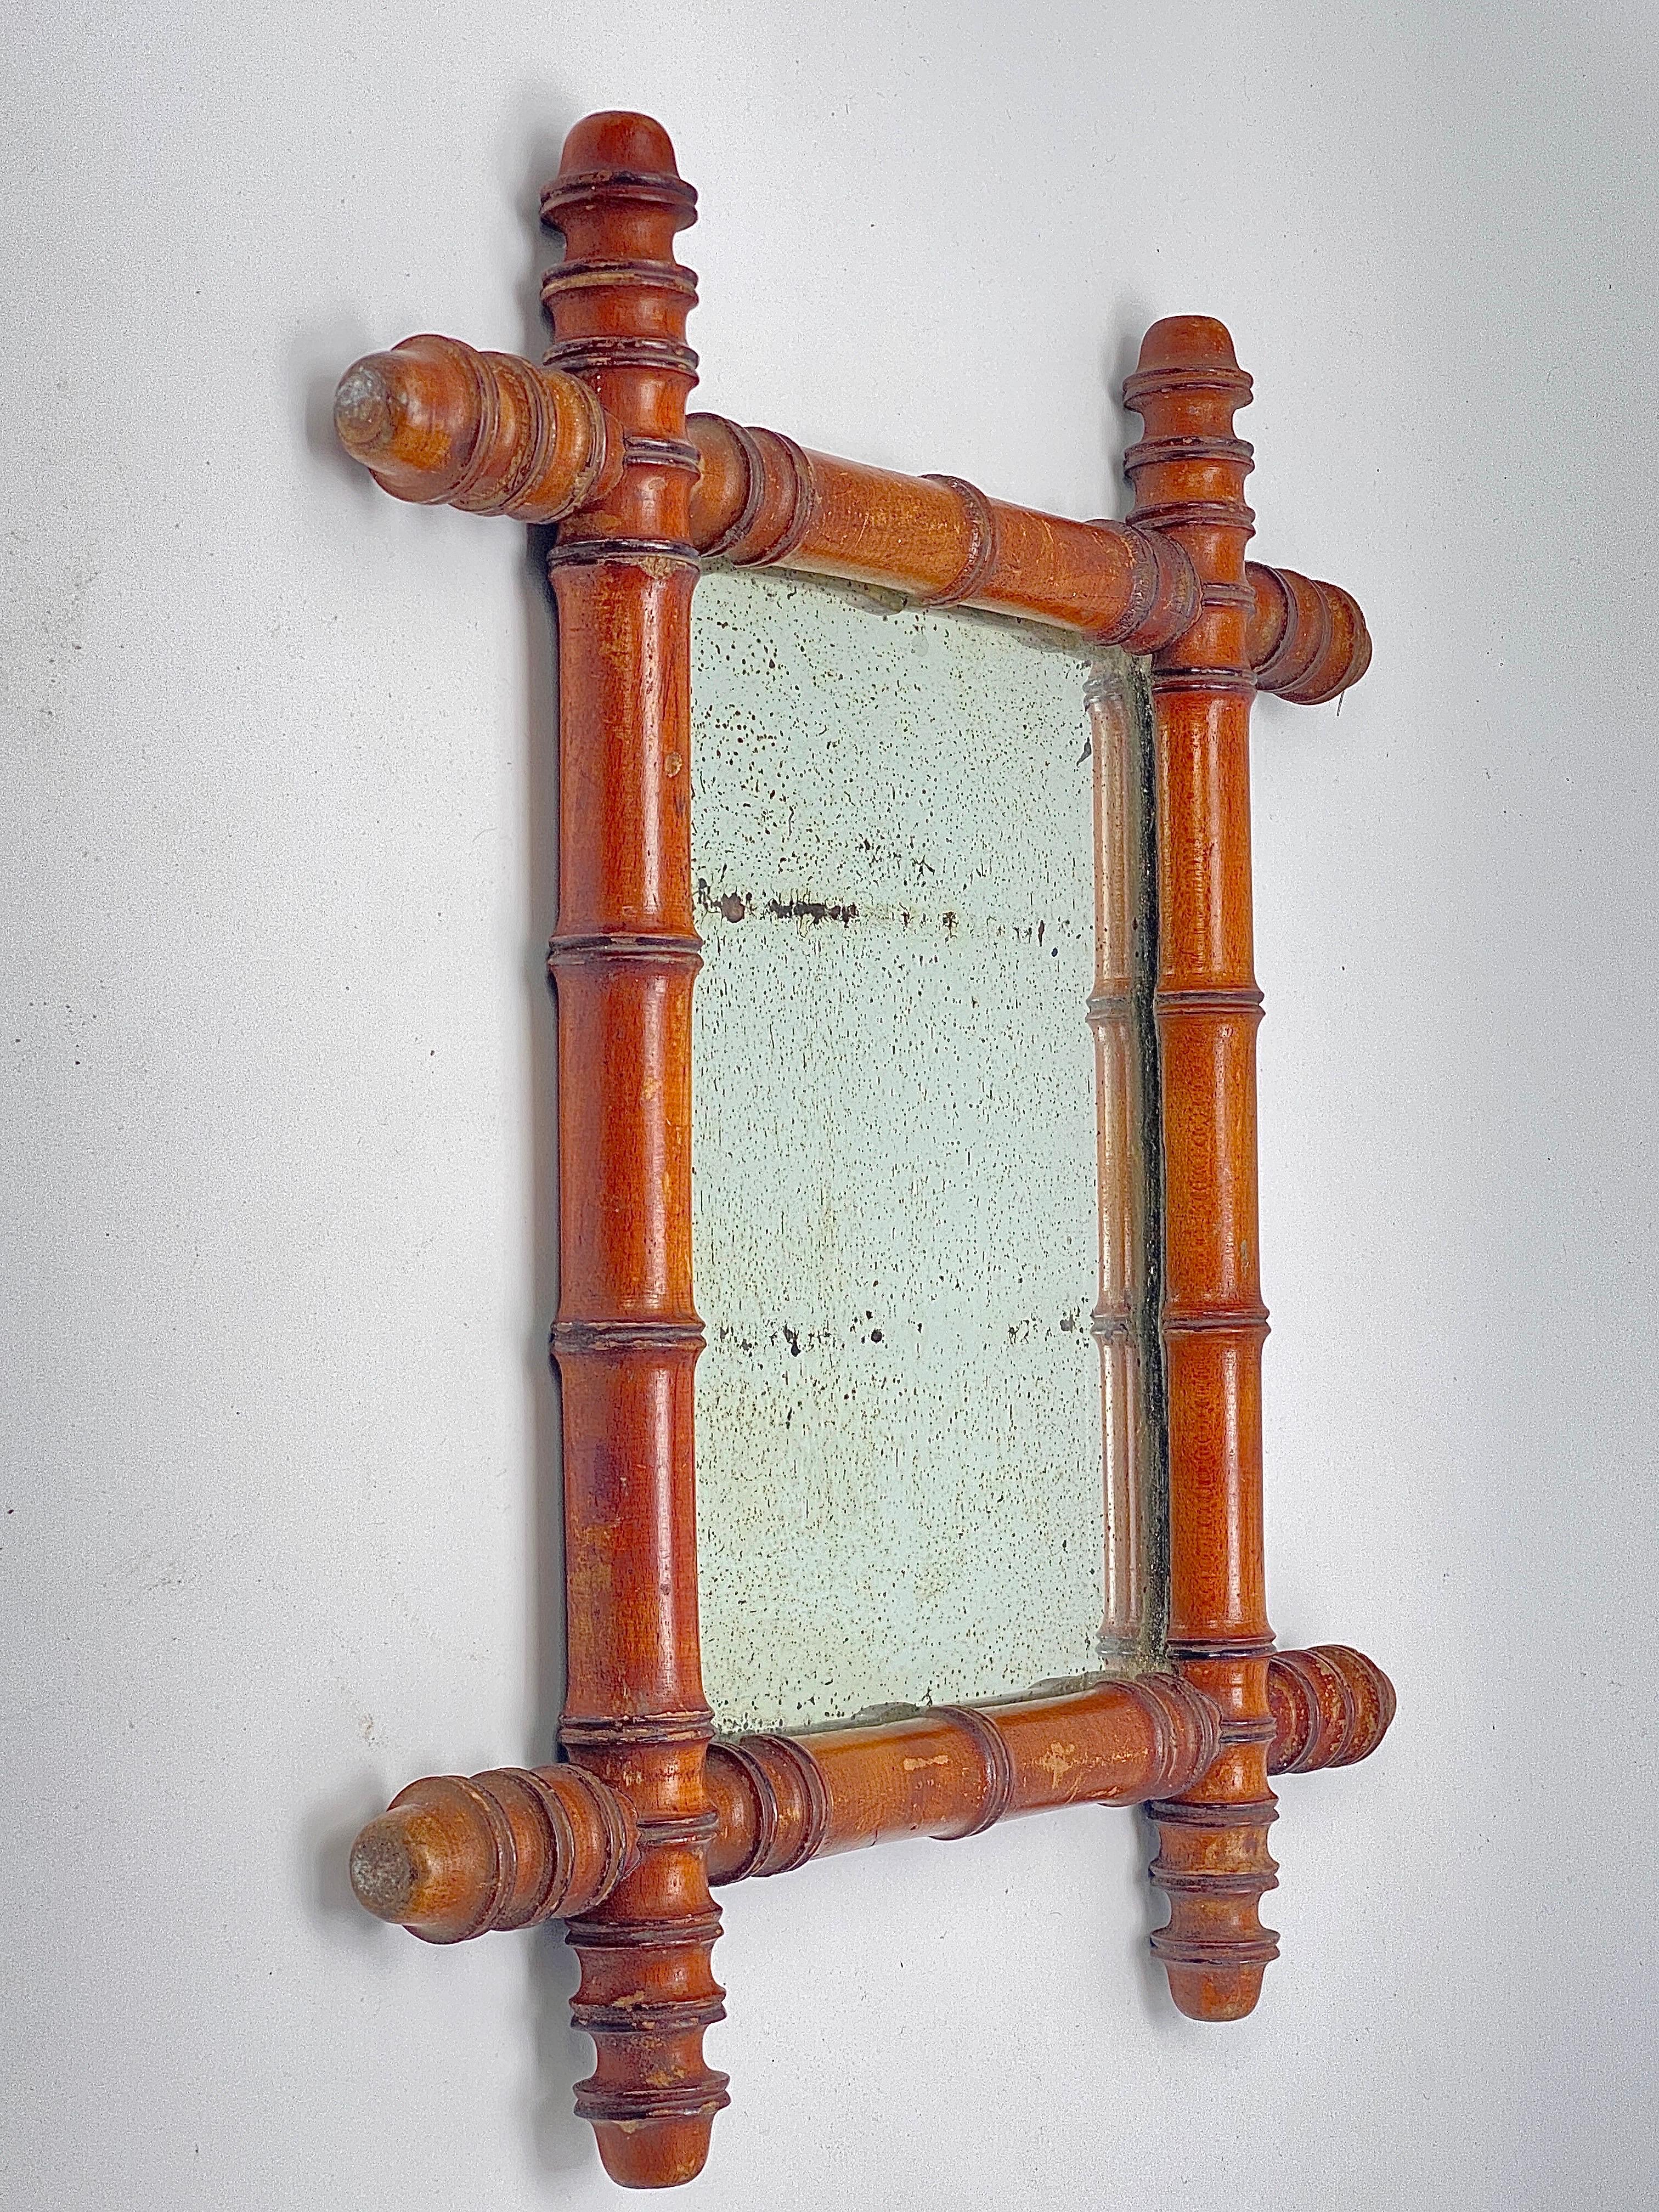 This mirror has been made in the 19th century, in France. The material is faux bamboo, in a brown color.